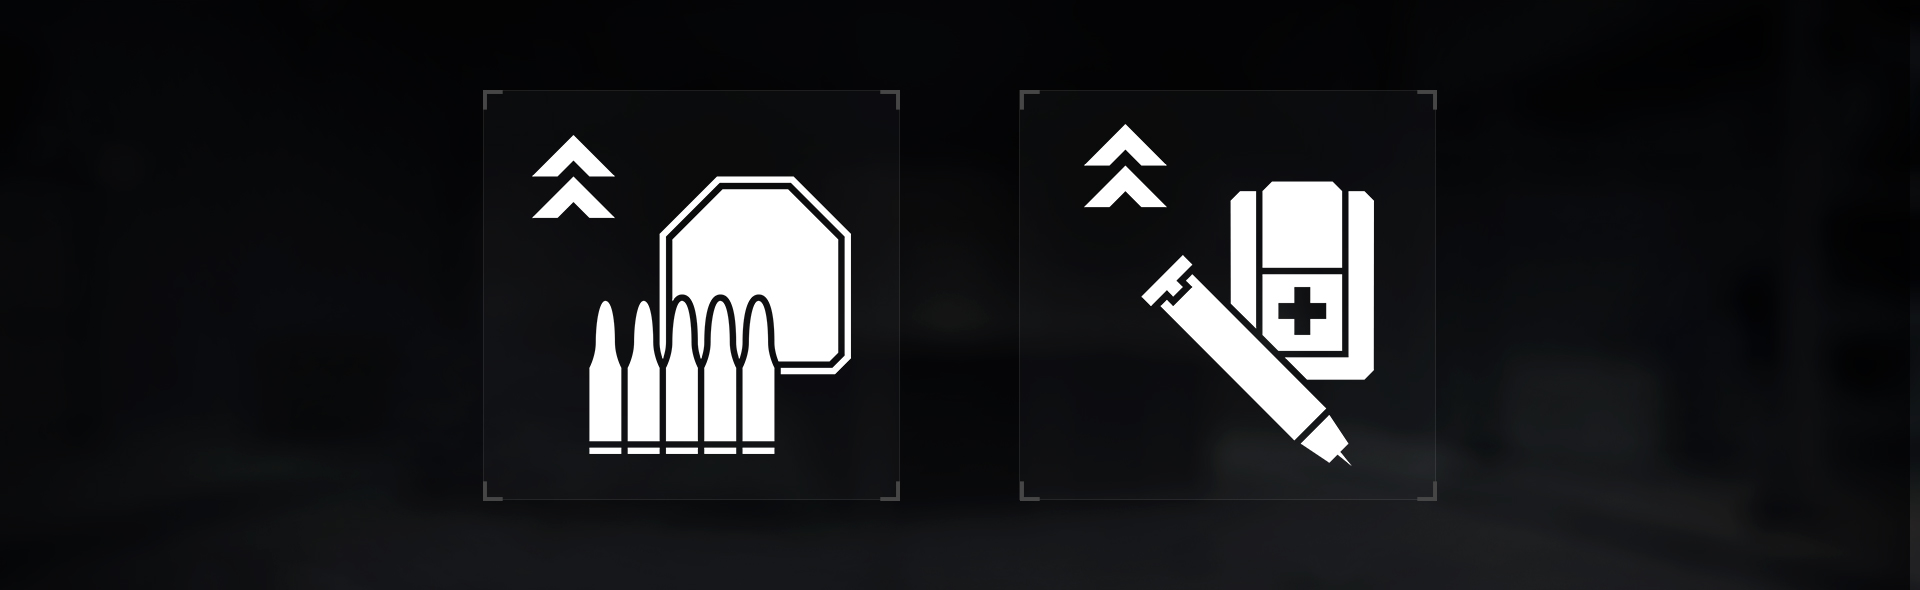 Upgrade modules that increase the amount of reserve slots for operators in v.0.18.0.